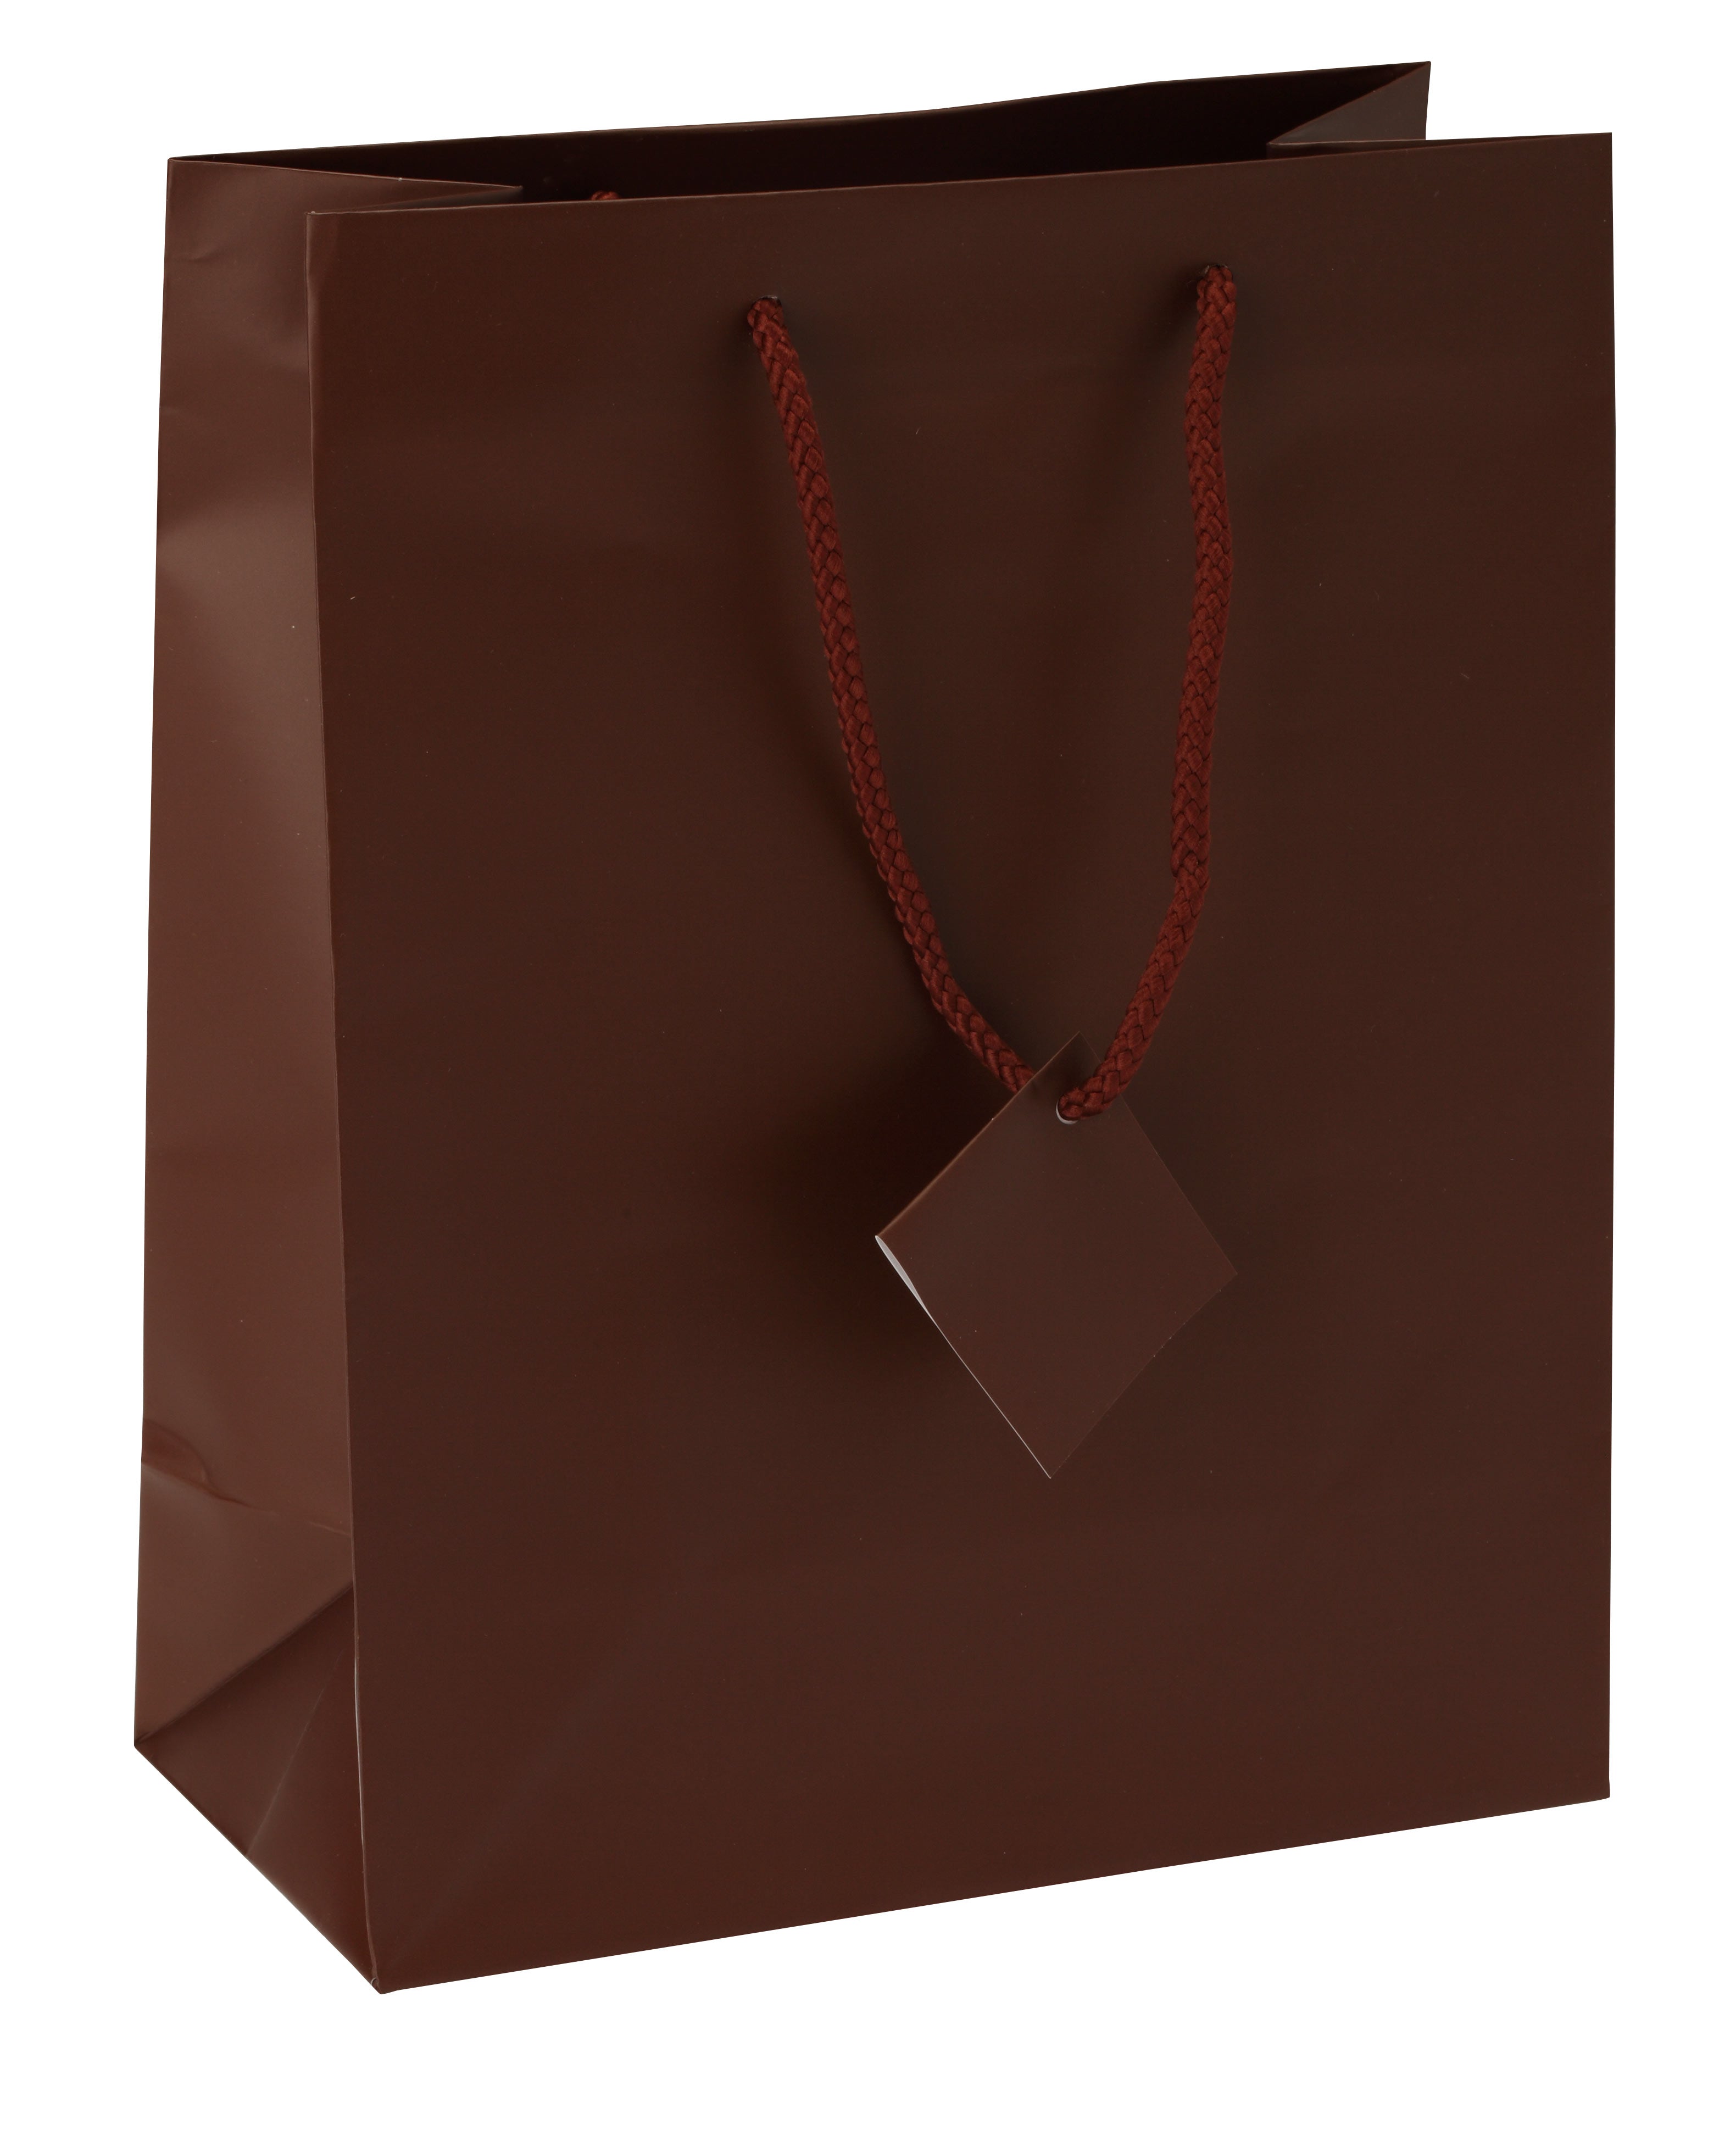 Satin-Finish Tote-Style Gift Bags in Chocolate Brown